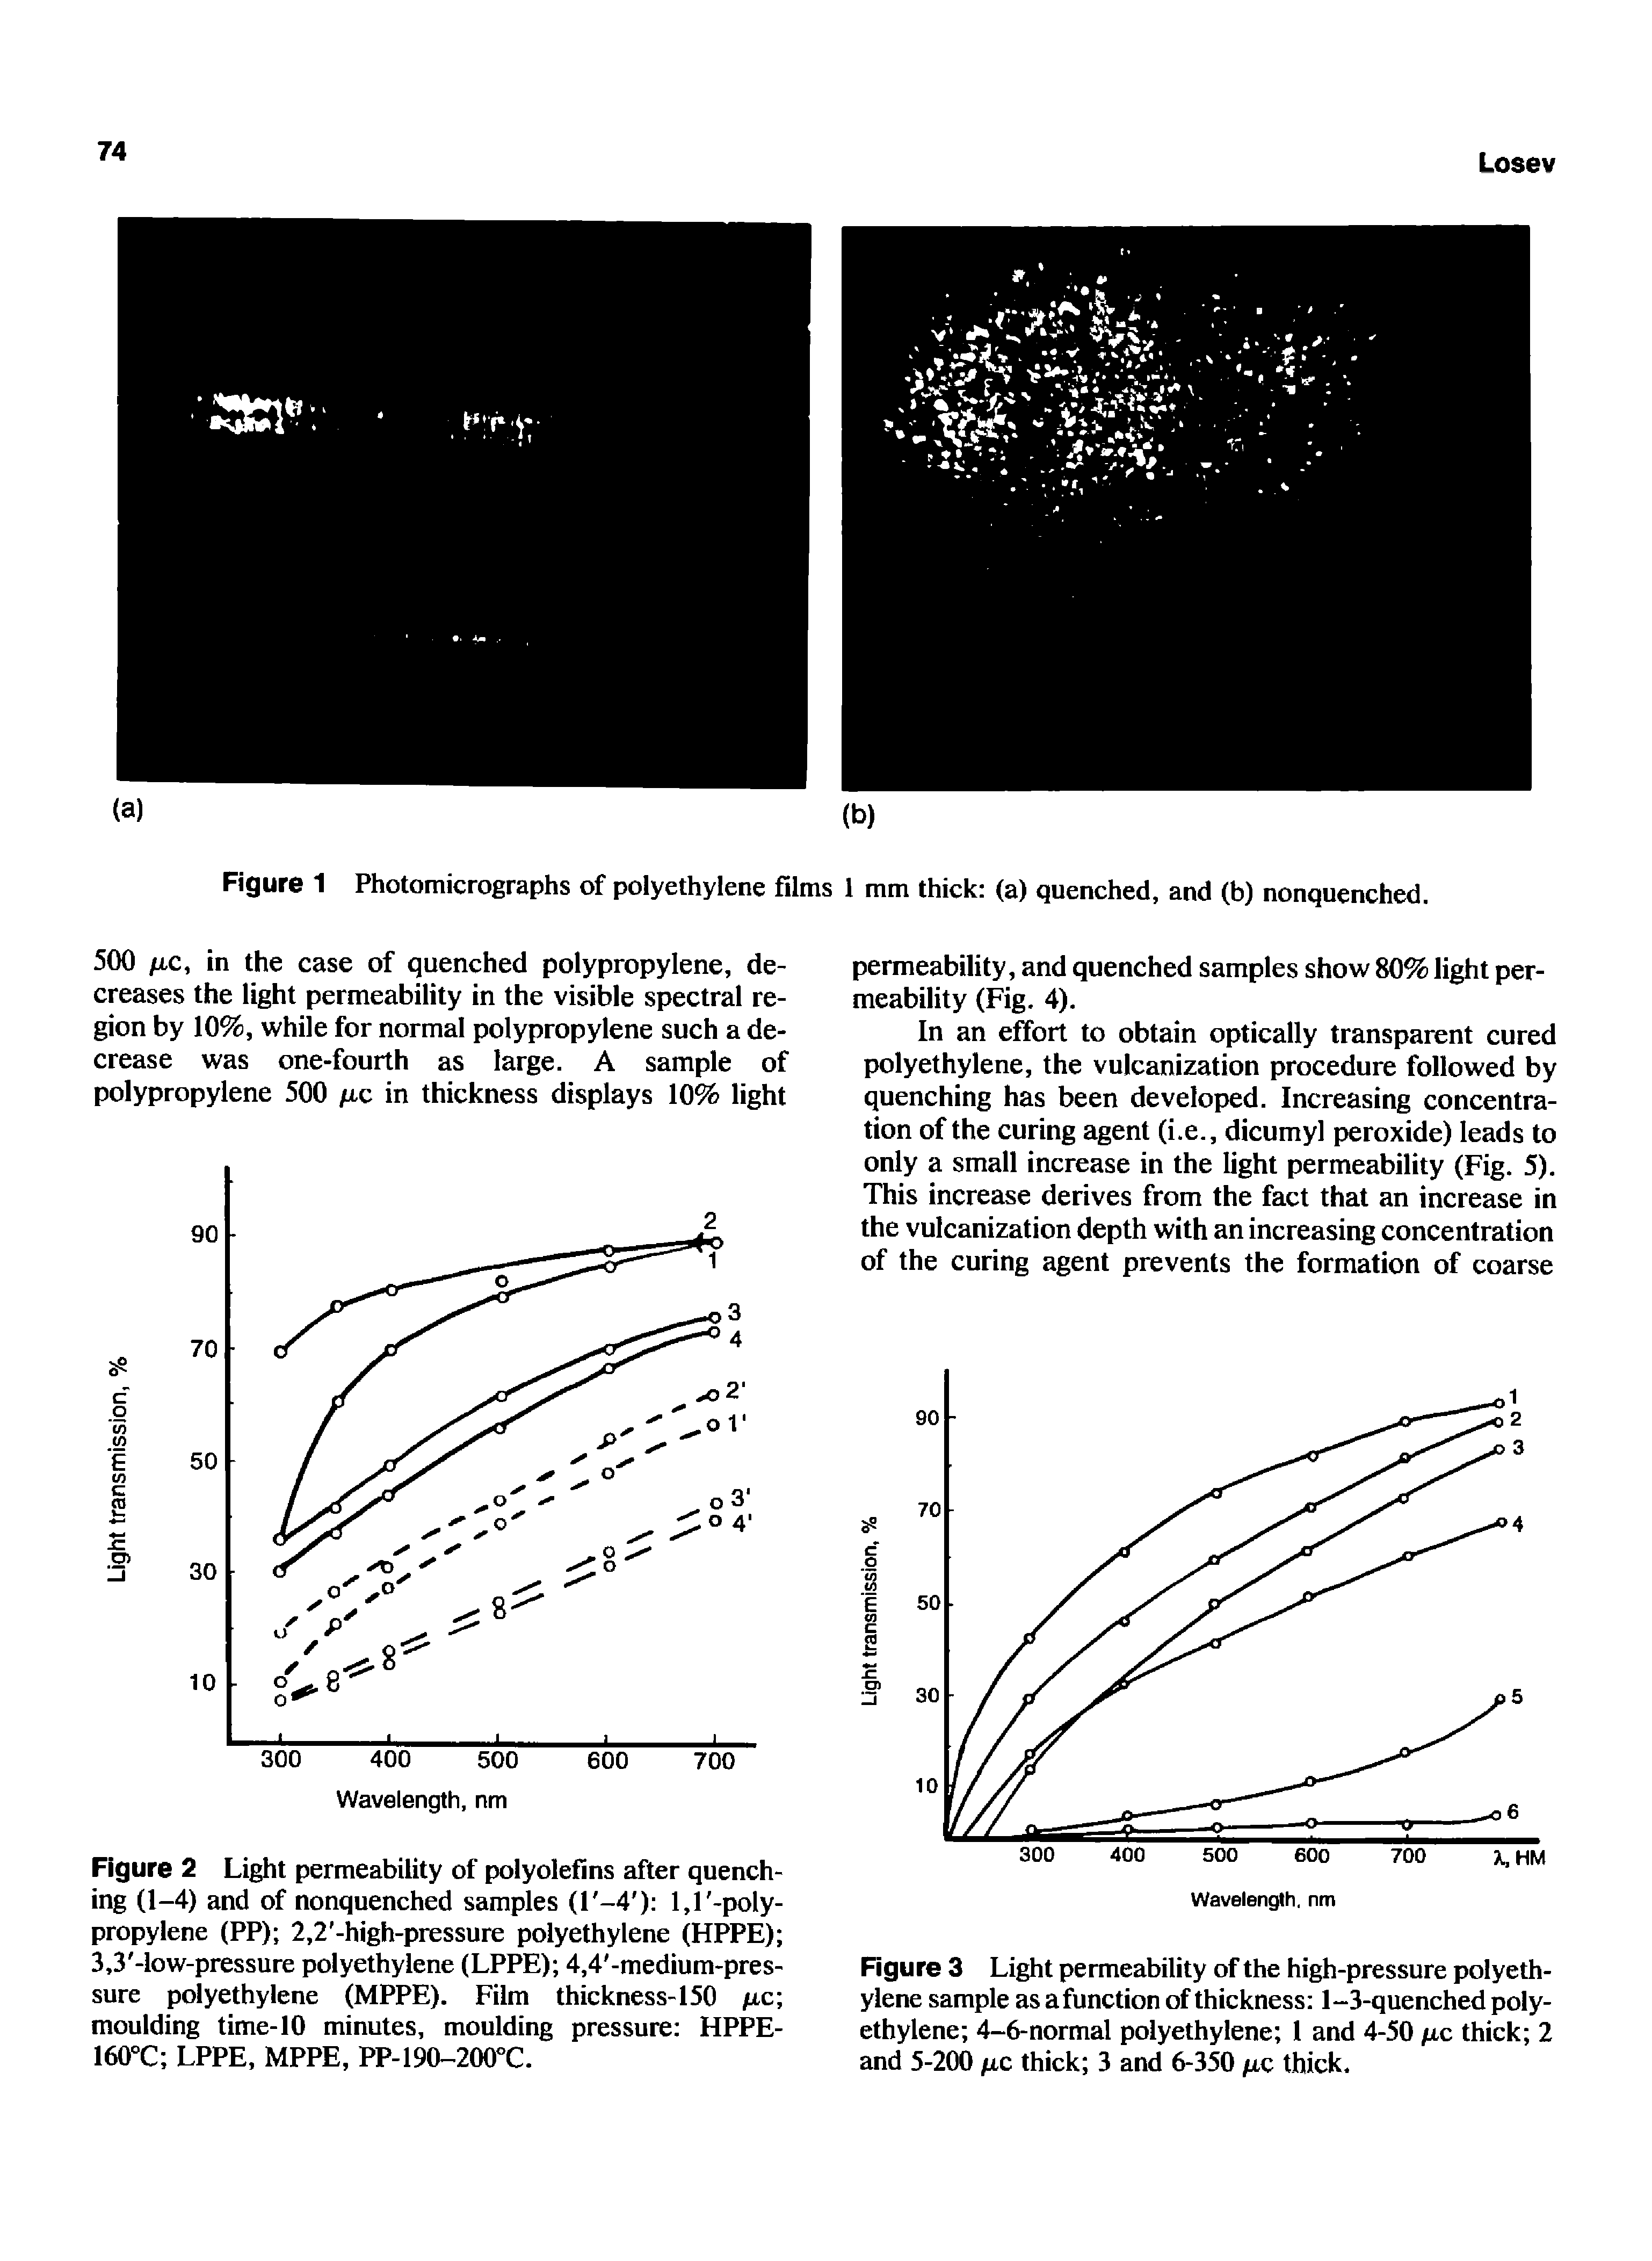 Figure 3 Light permeability of the high-pressure polyethylene sample as a function of thickness I-3-quenched polyethylene 4-6-normal polyethylene 1 and 4-50 jlc thick 2 and 5-200 /jlc thick 3 and 6-350 fic thick.